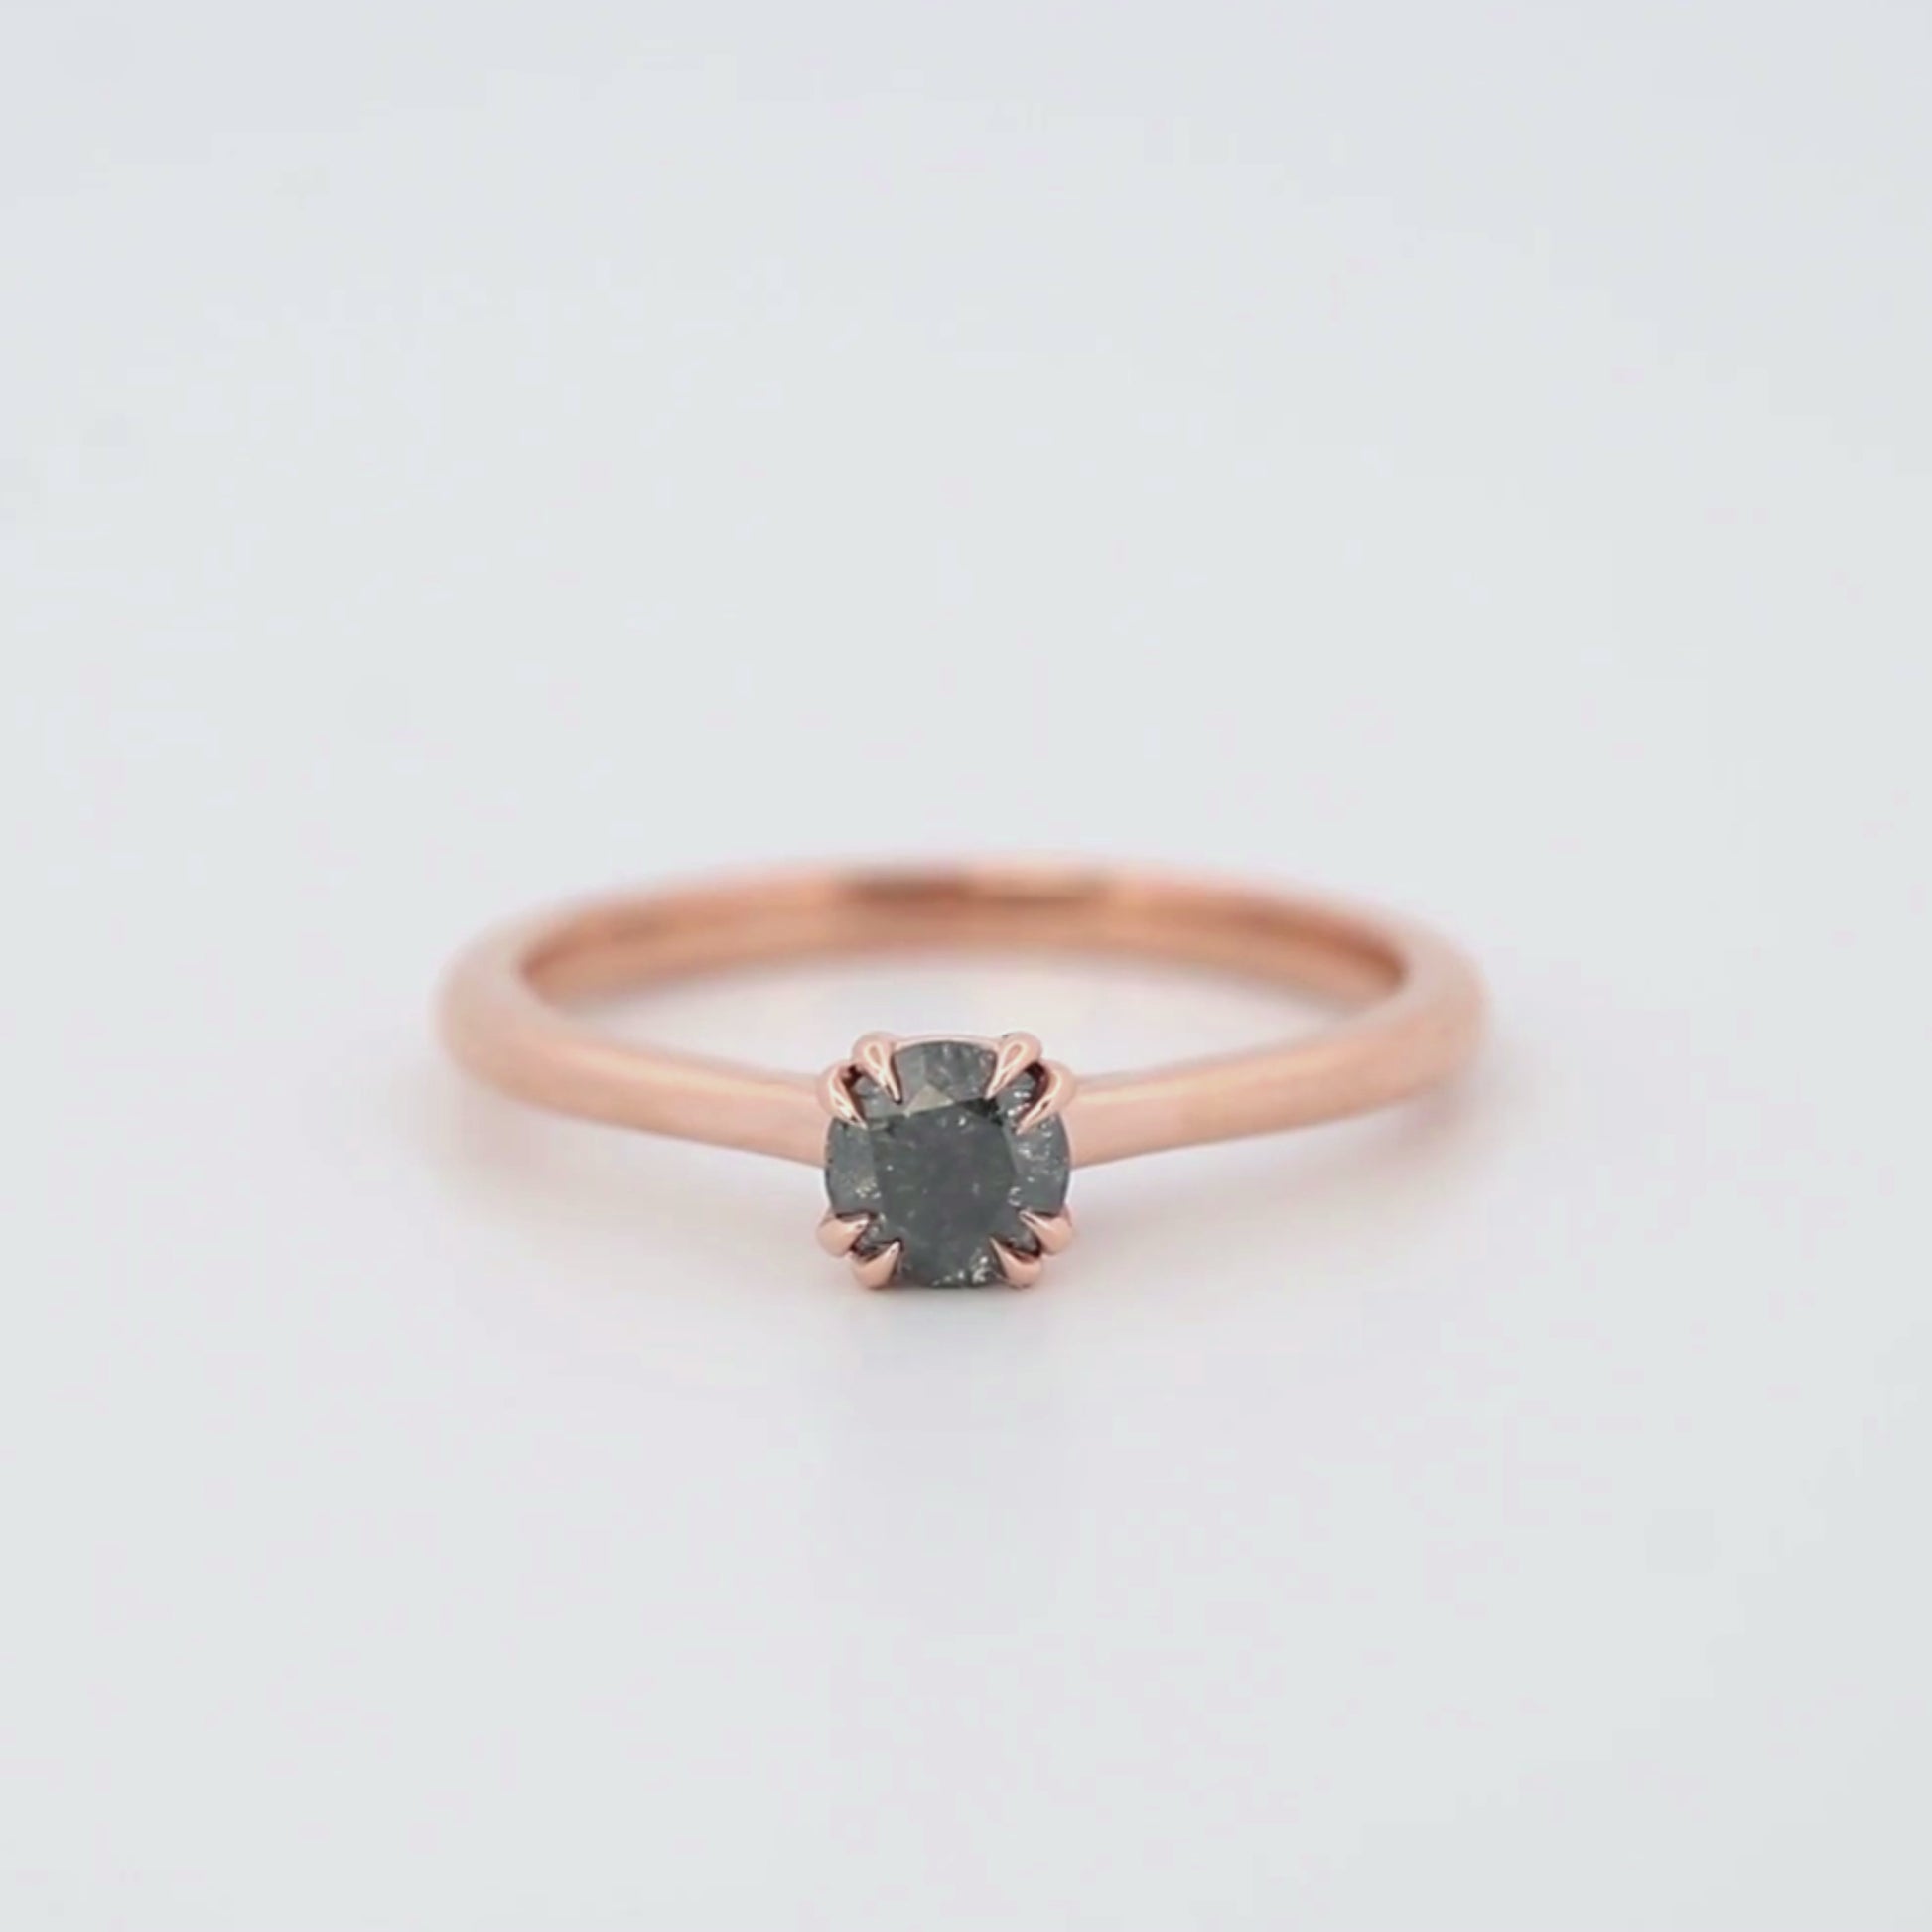 Nesta Ring with a 0.45 Carat Round Black Salt and Pepper Diamond in 14k Rose Gold - Ready to Size and Ship